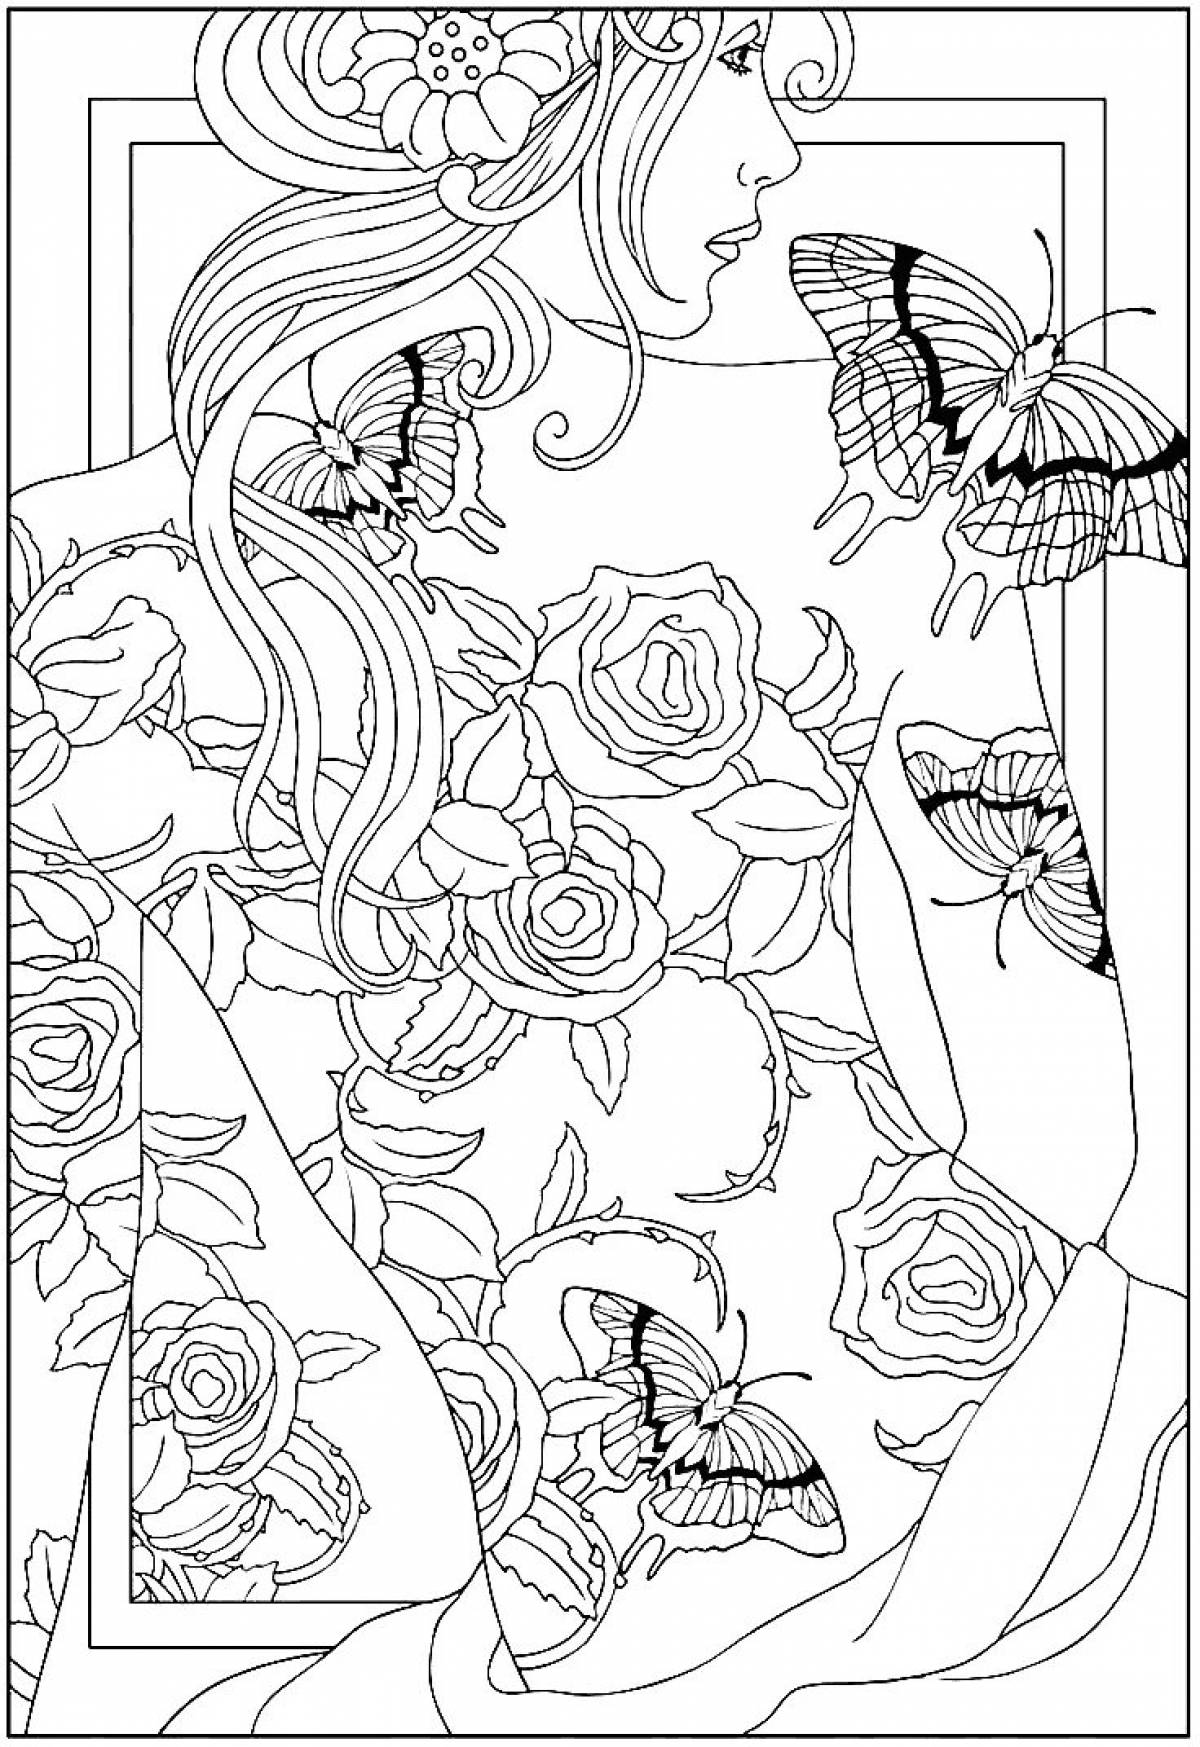 Colorful coloring pages for adults